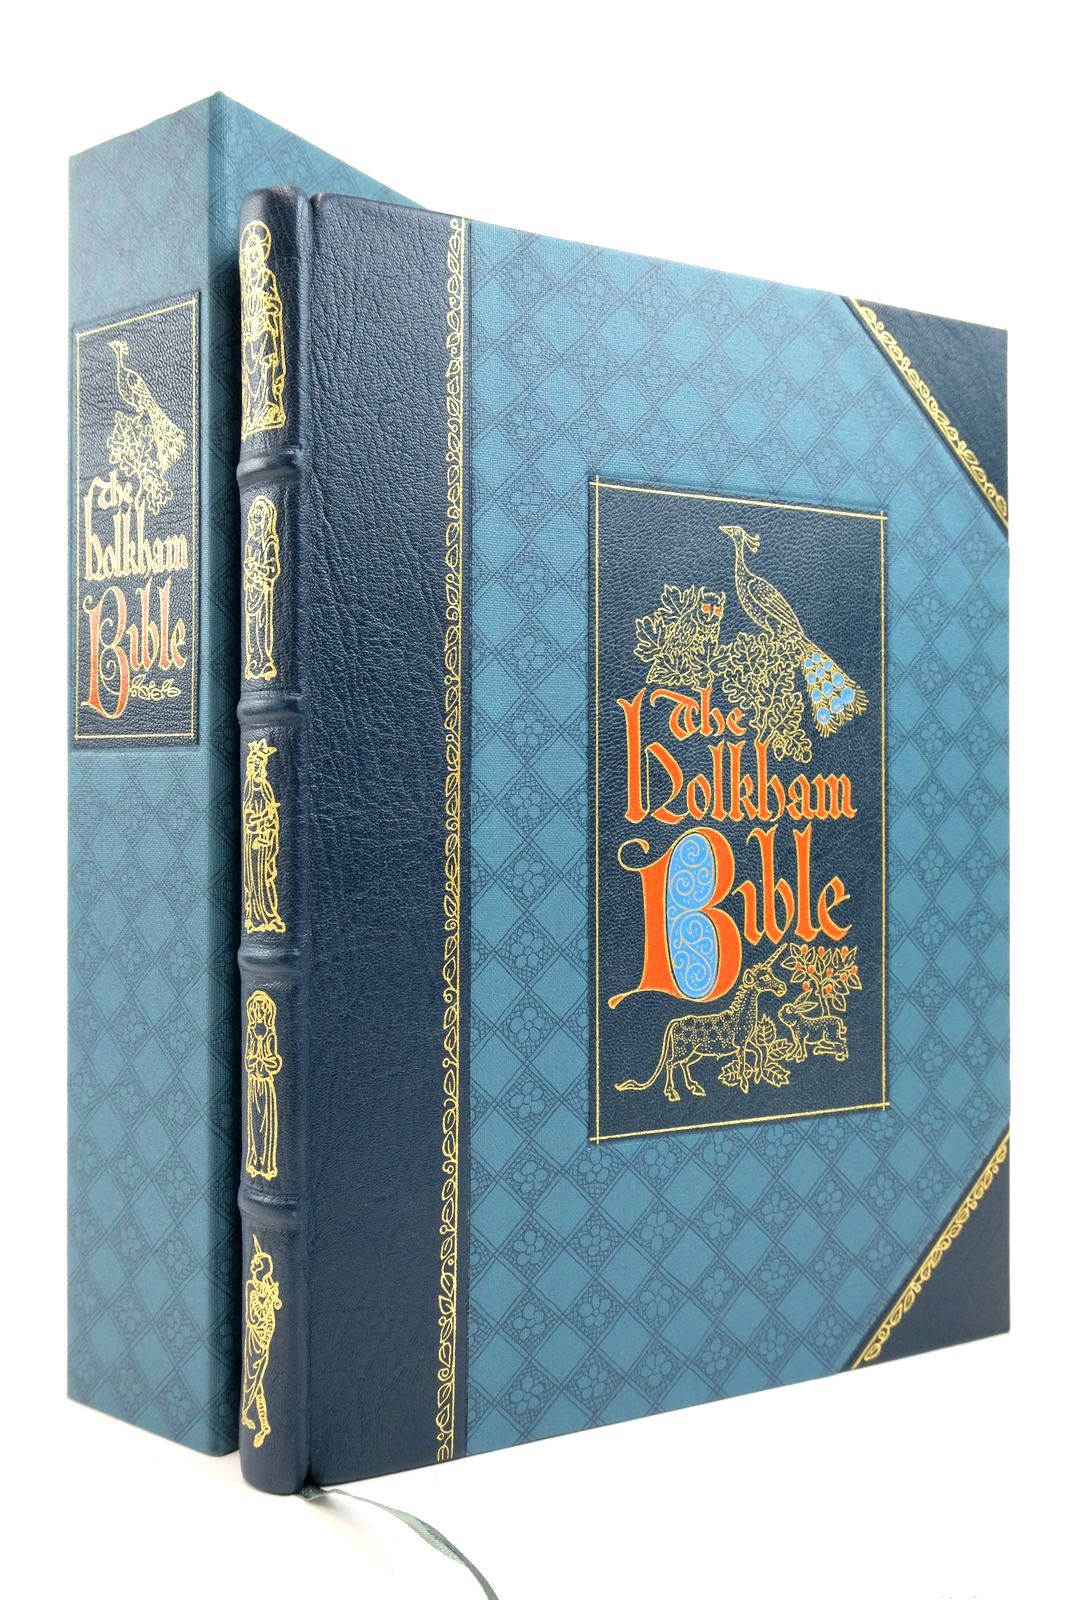 Photo of THE HOLKHAM BIBLE written by Brown, Michelle P. published by Folio Society (STOCK CODE: 2140291)  for sale by Stella & Rose's Books